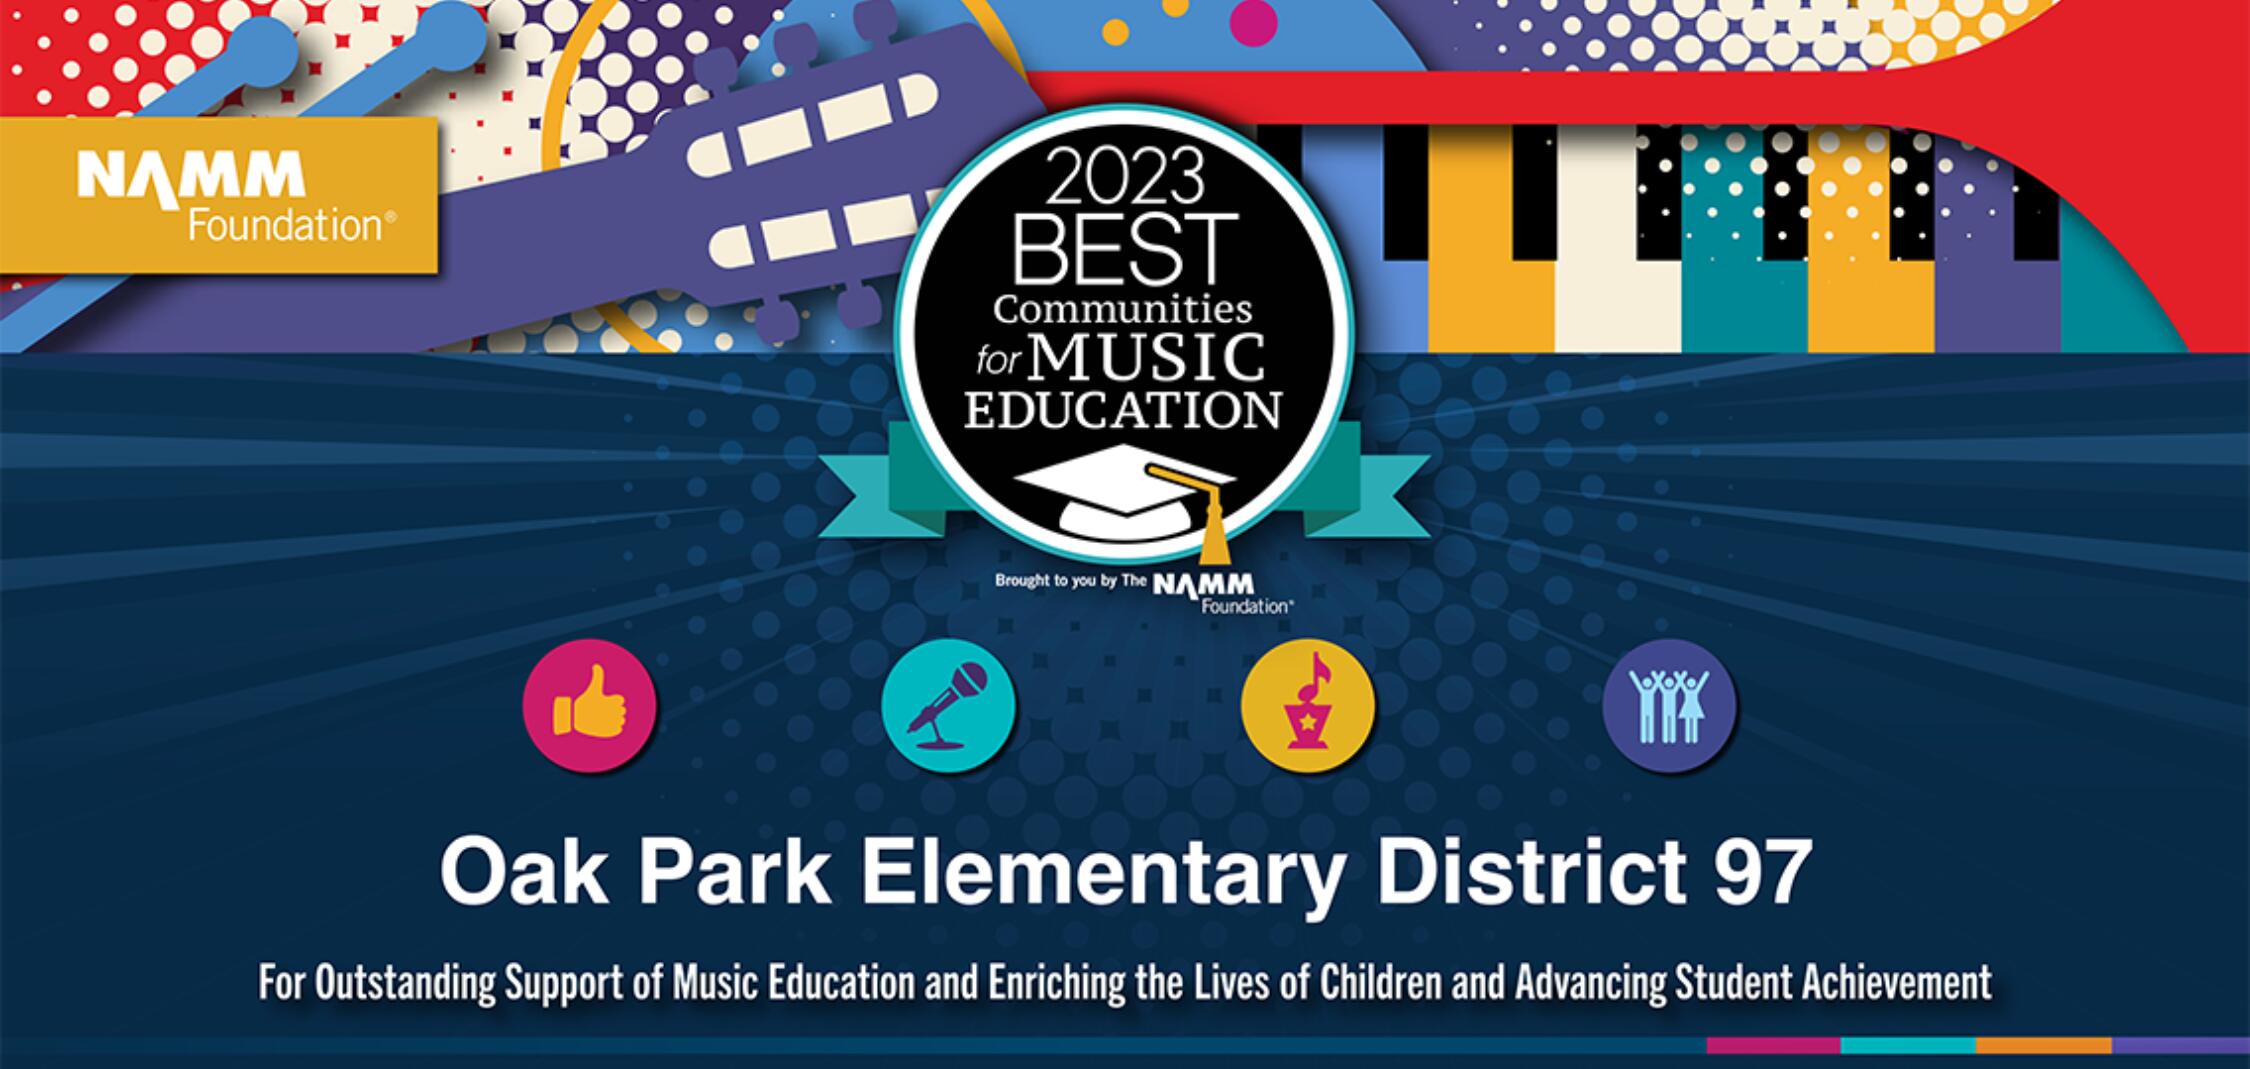 D97 recognized nationally for music education.